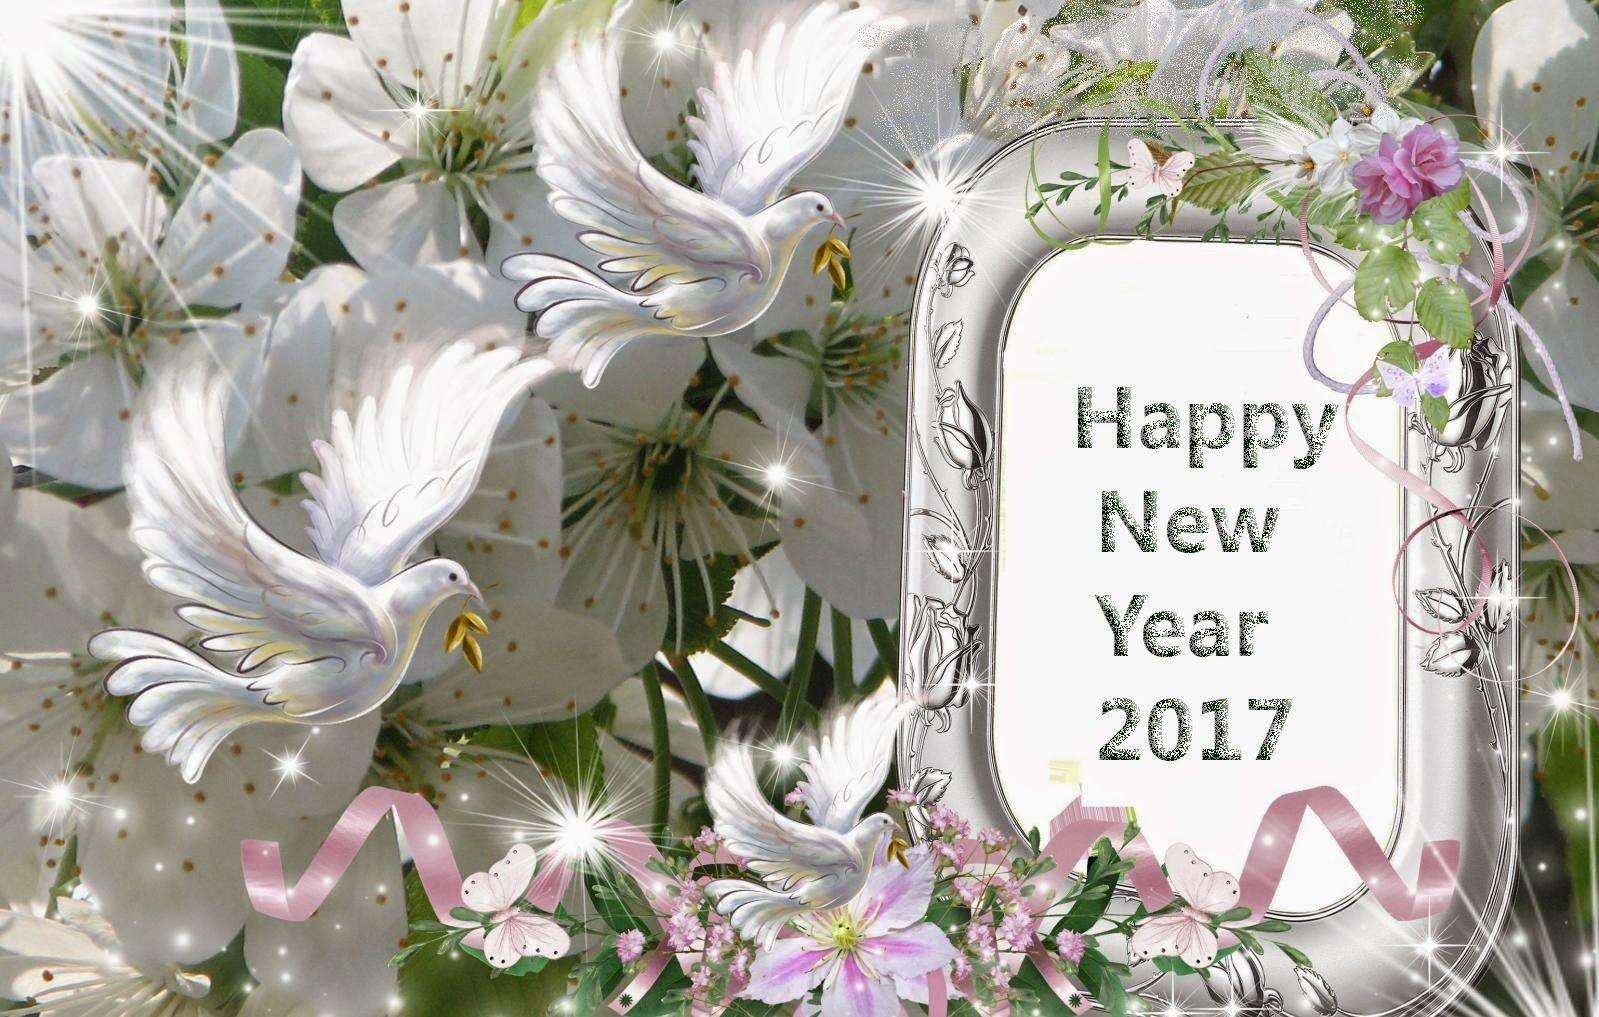 Celebrate New Year with Happy New Year Latest Wallpaper 2017